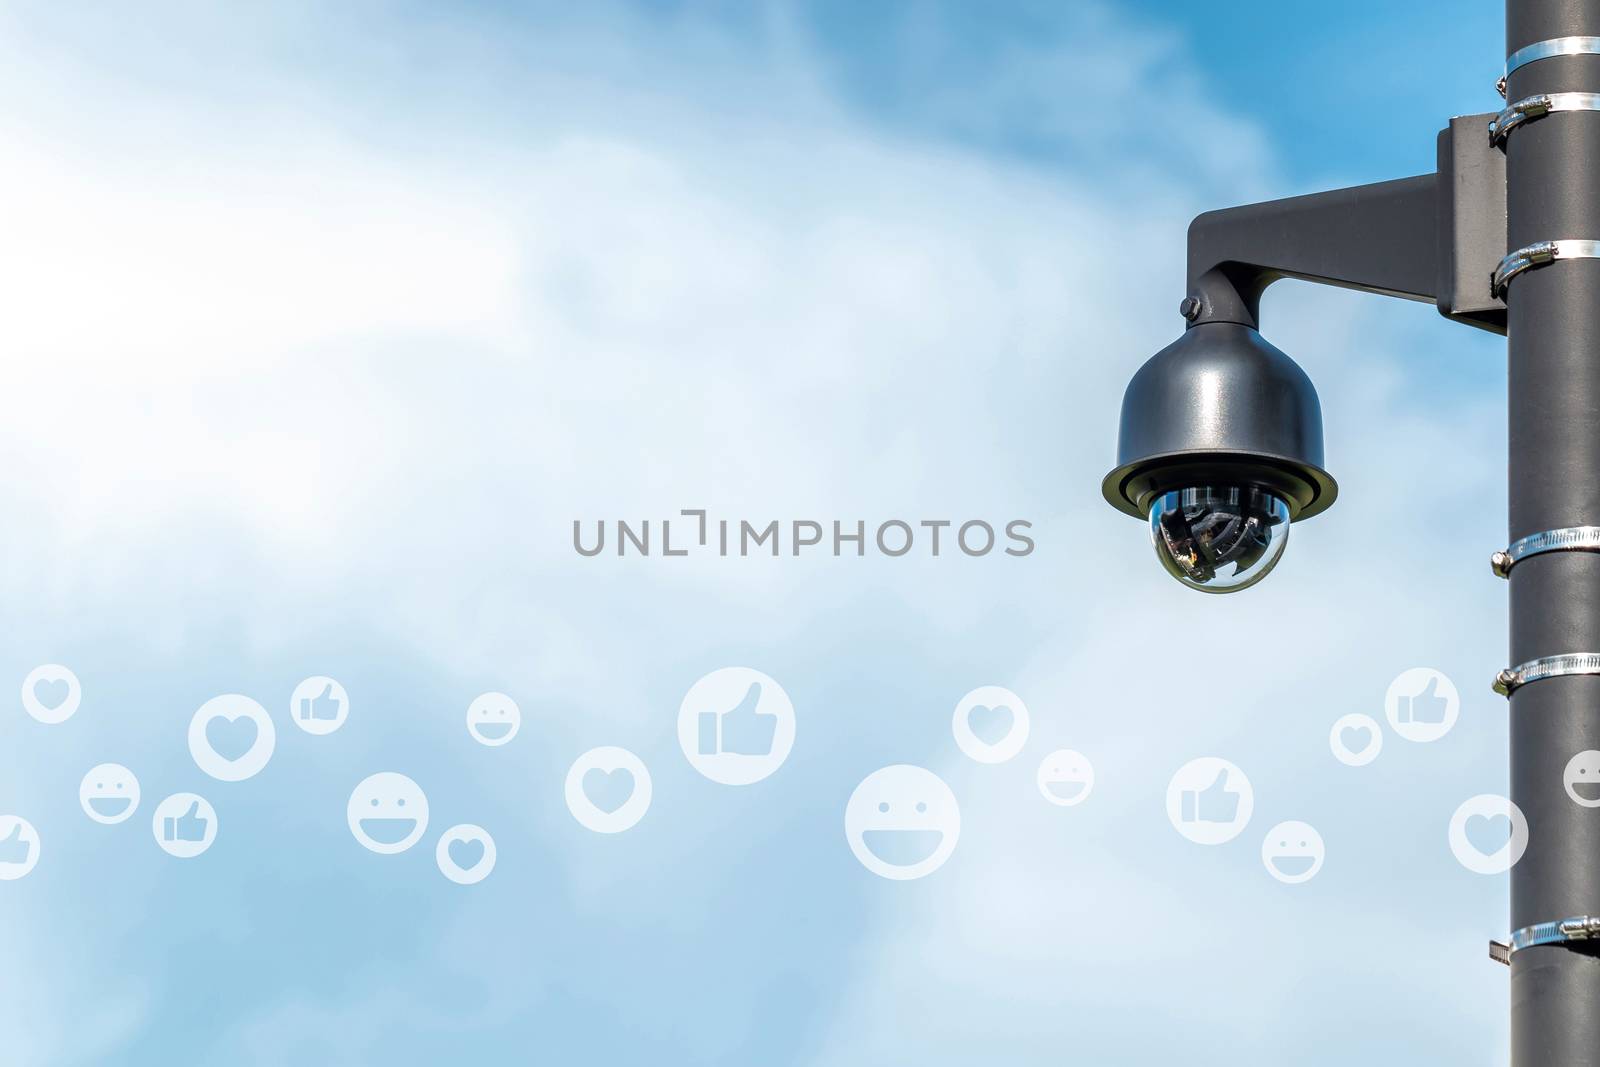 social media icons of thumb up, heart and smile face with CCTV security camera against beautiful sky, concept of social media feedback mornitoring, image with copy space